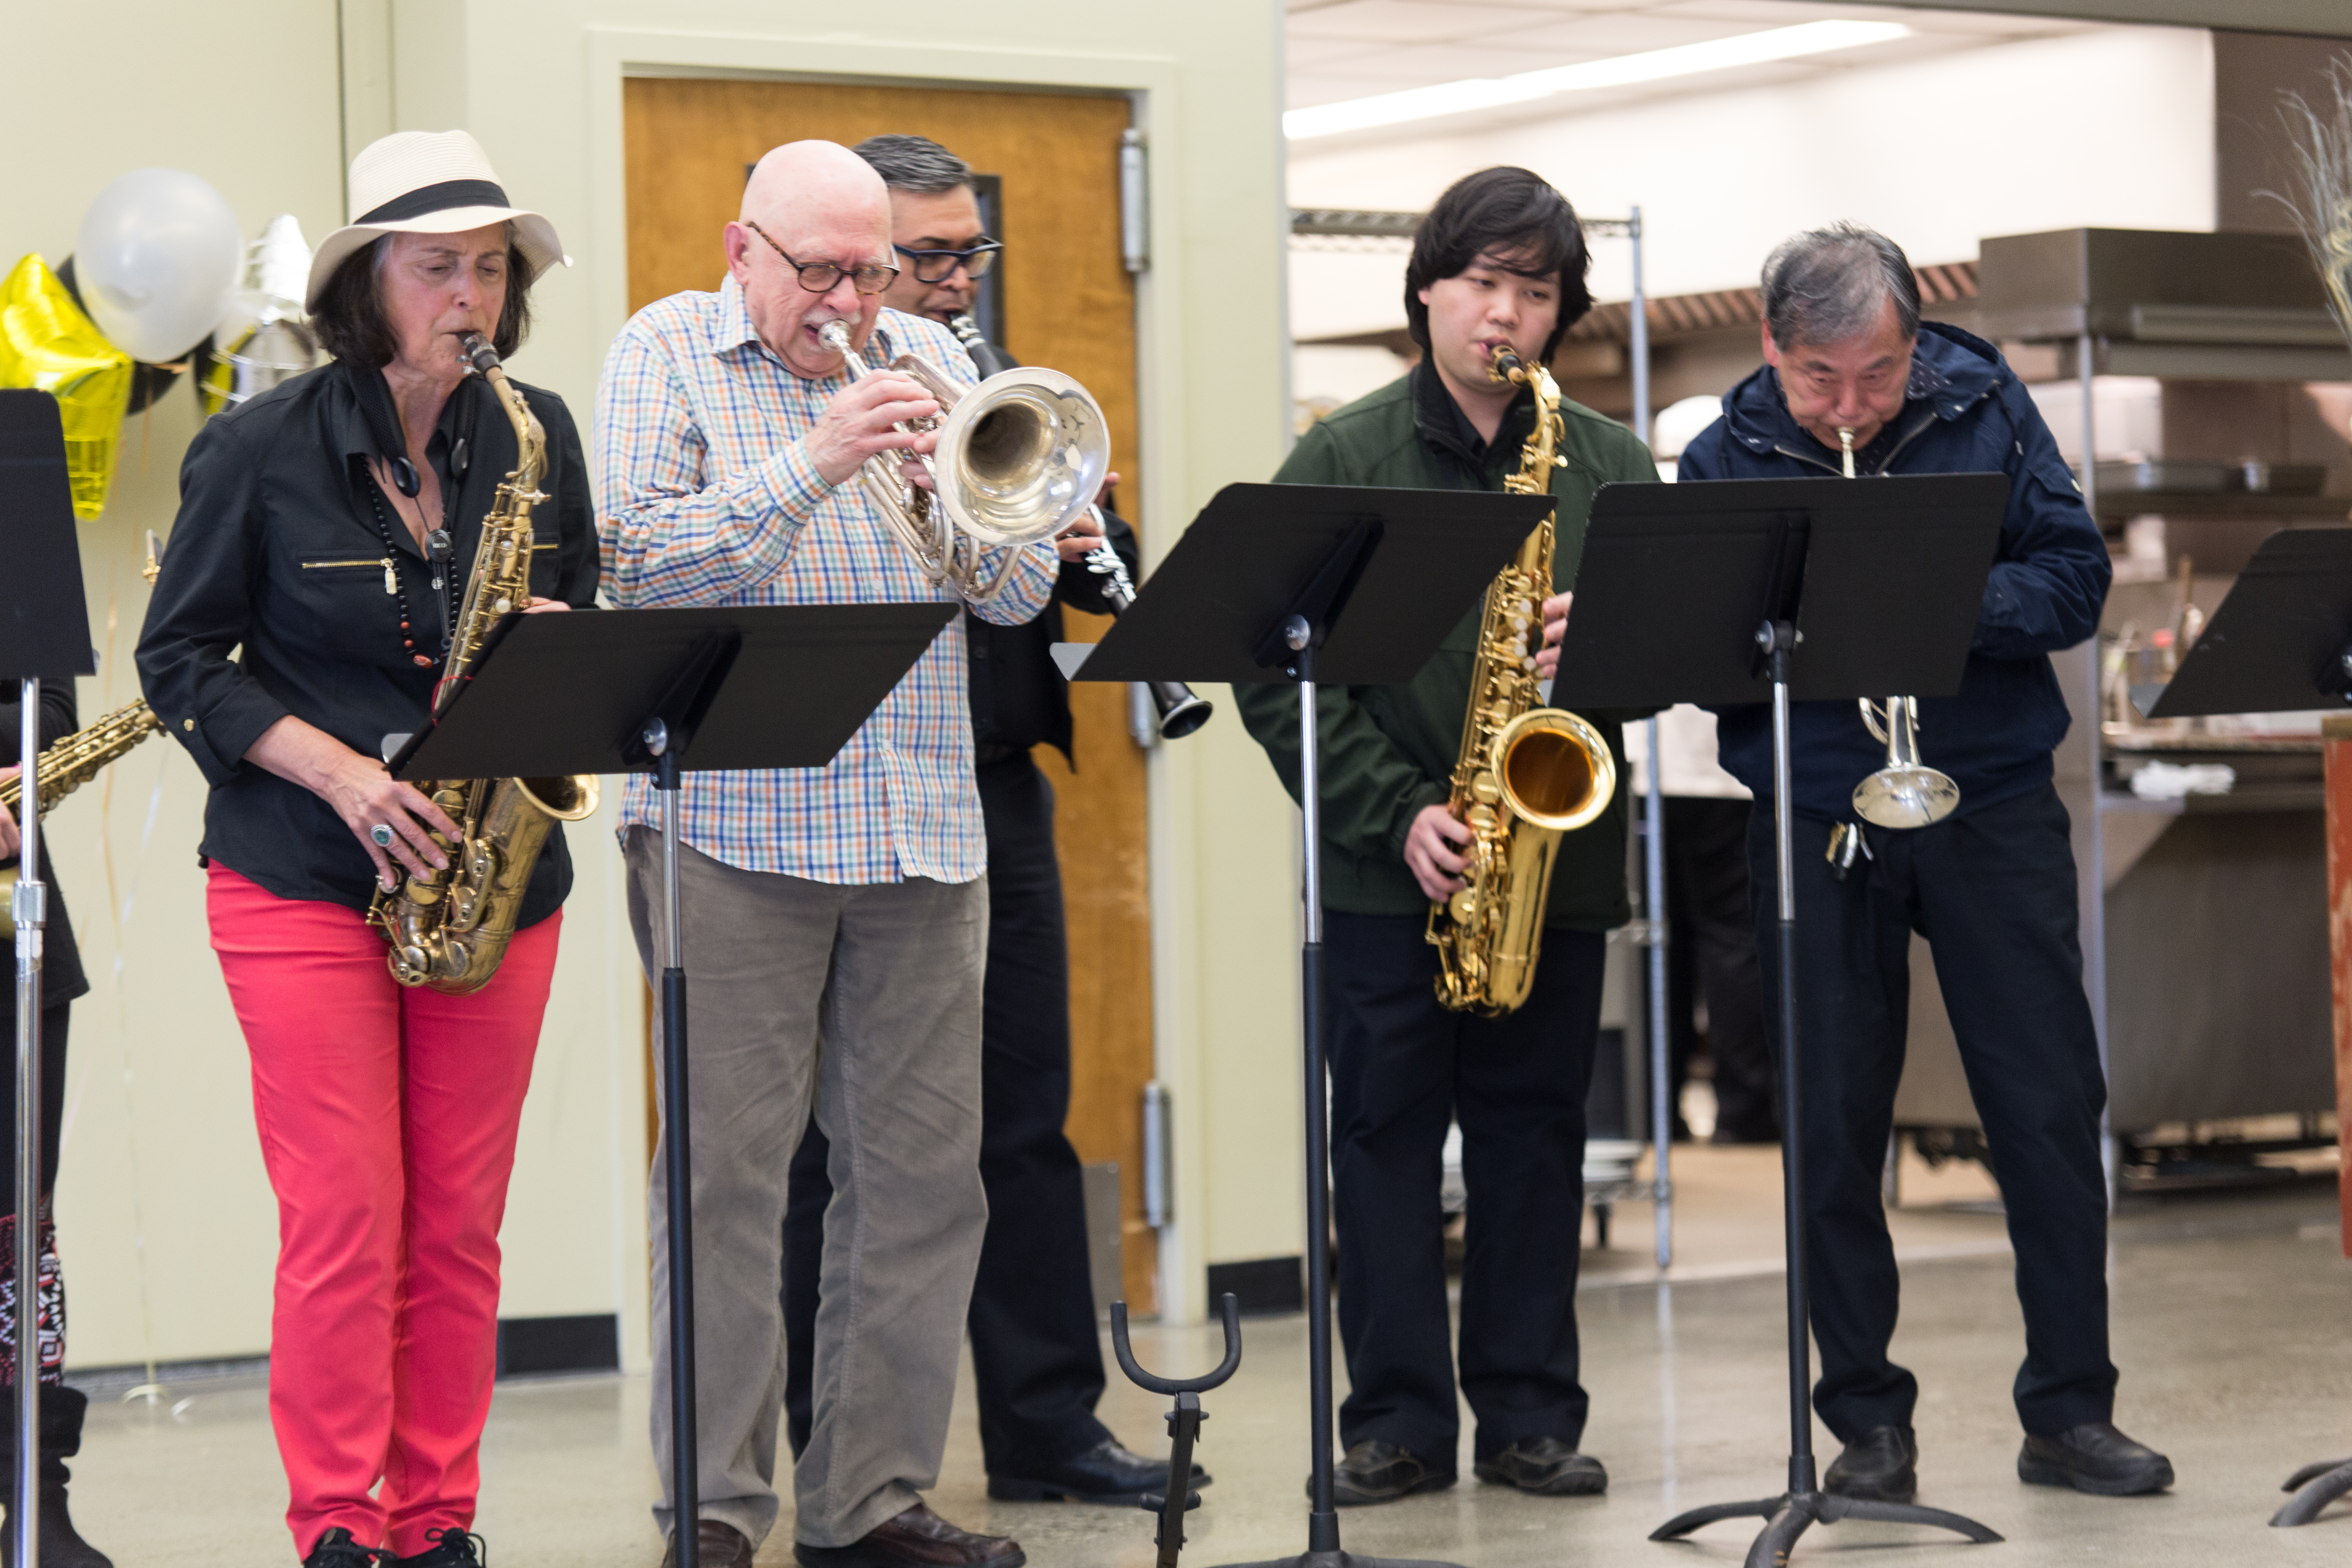  From left to right, Frank Phipps, Van Mares, Ferdinand Hartanto, John Lou and the band performs “When the Saints Go Marching In” by Katharine Purvis and James Milton Black as the opening song in the Pierre Coste Room on Apr. 13, 2017. Photo by John Ortilla/The Guardsman. 